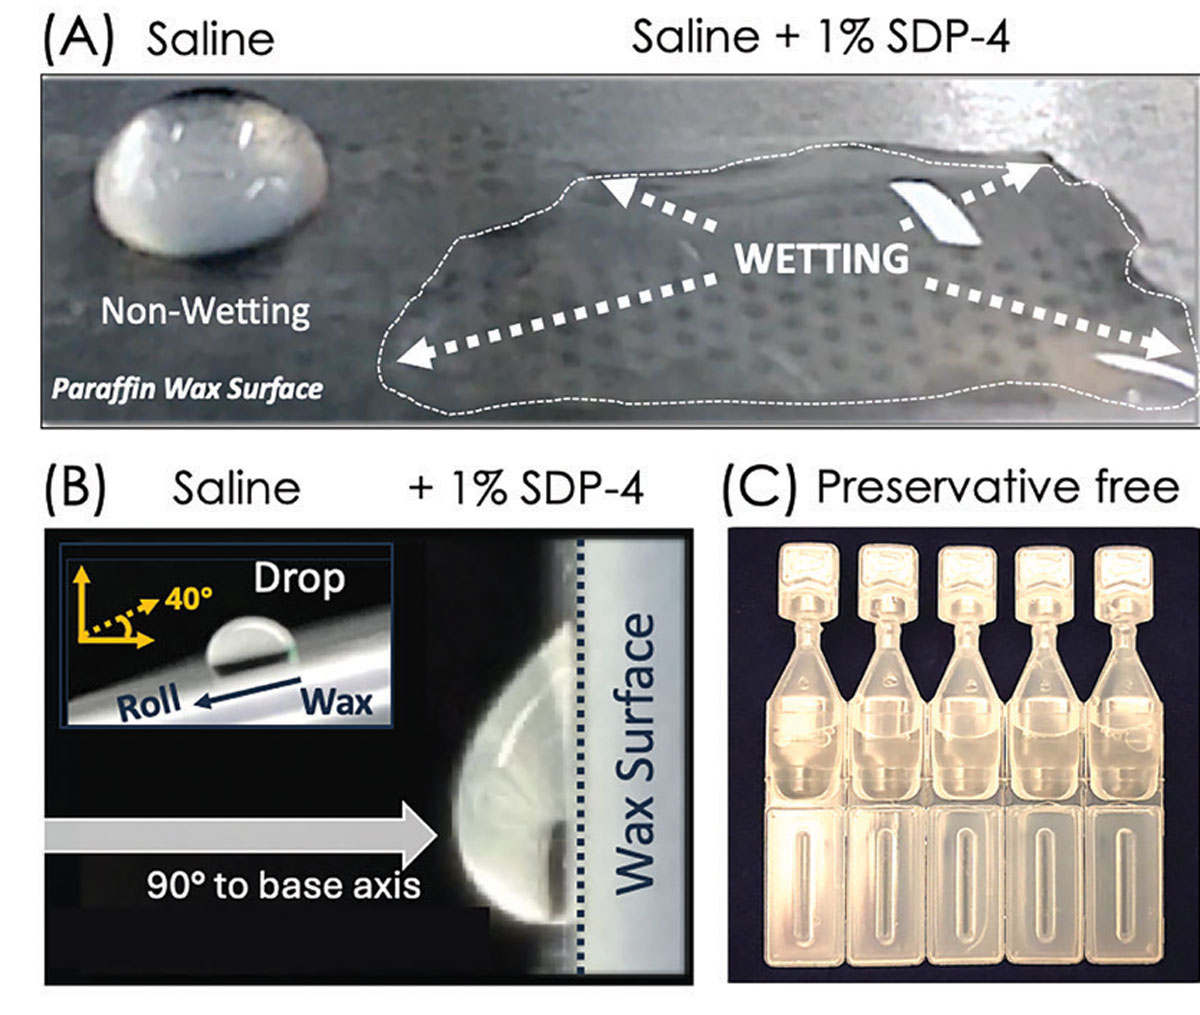 SDP-4 (1% w/w) was formulated within a preservative-free artificial tear formulation (SilkTears). SDP-4 improves formulation (A) surface wetting and (B) coating adherence properties as demonstrated when added to saline, and then placed on a wax surface.